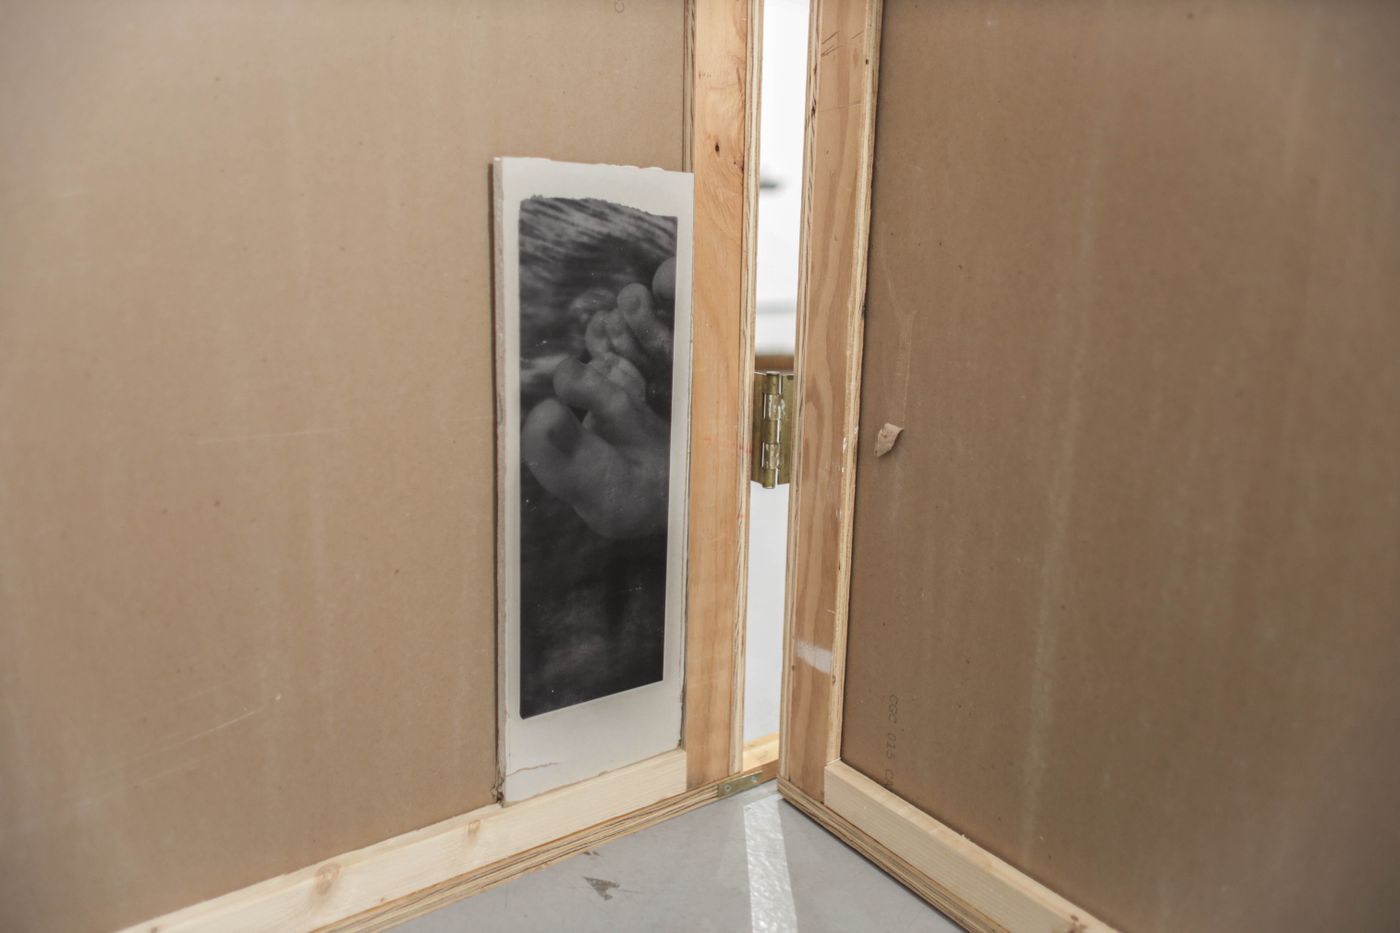 Touch and Recognition I-VI, 2022. Drywall, wood, construction adhesive, hinges, screws; giclée transfer prints; 96 x 152 x 38 in. Photo: Allison Minto.